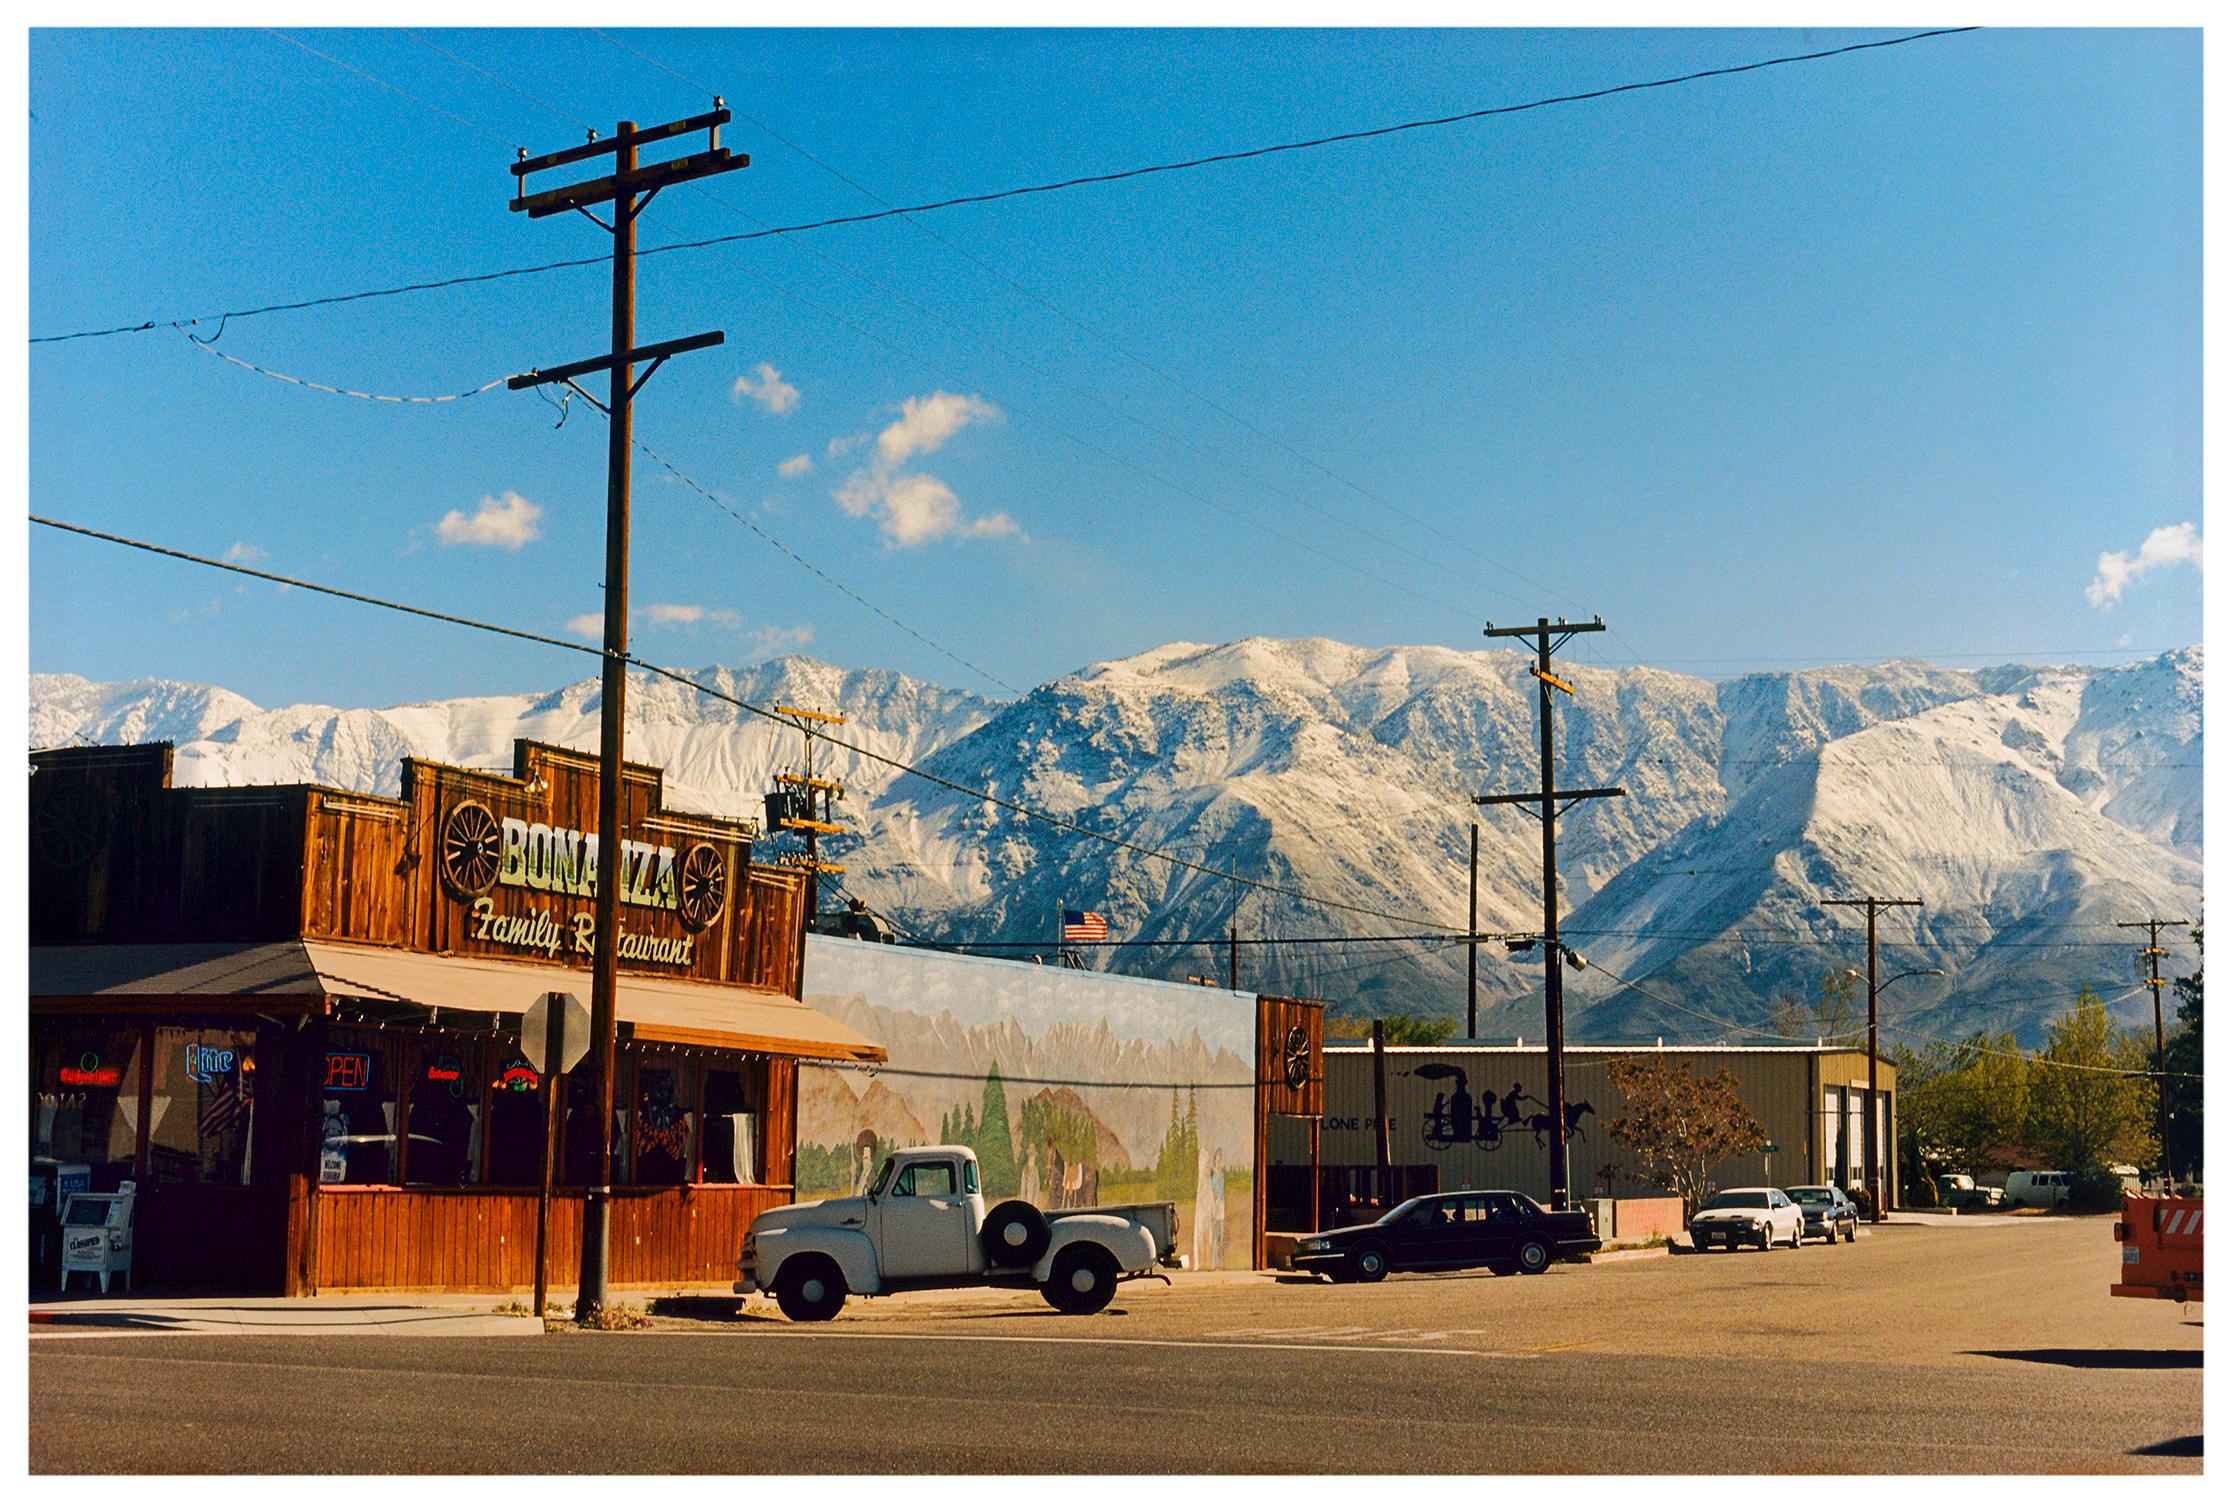 There is a cinematic style to this artwork, Lone Pine, taken in a former movie town in California, many Western films were made there. Taken outside Richard's iconic interior photograph 'Bonanza Café', set in the Owens Valley against a mountain